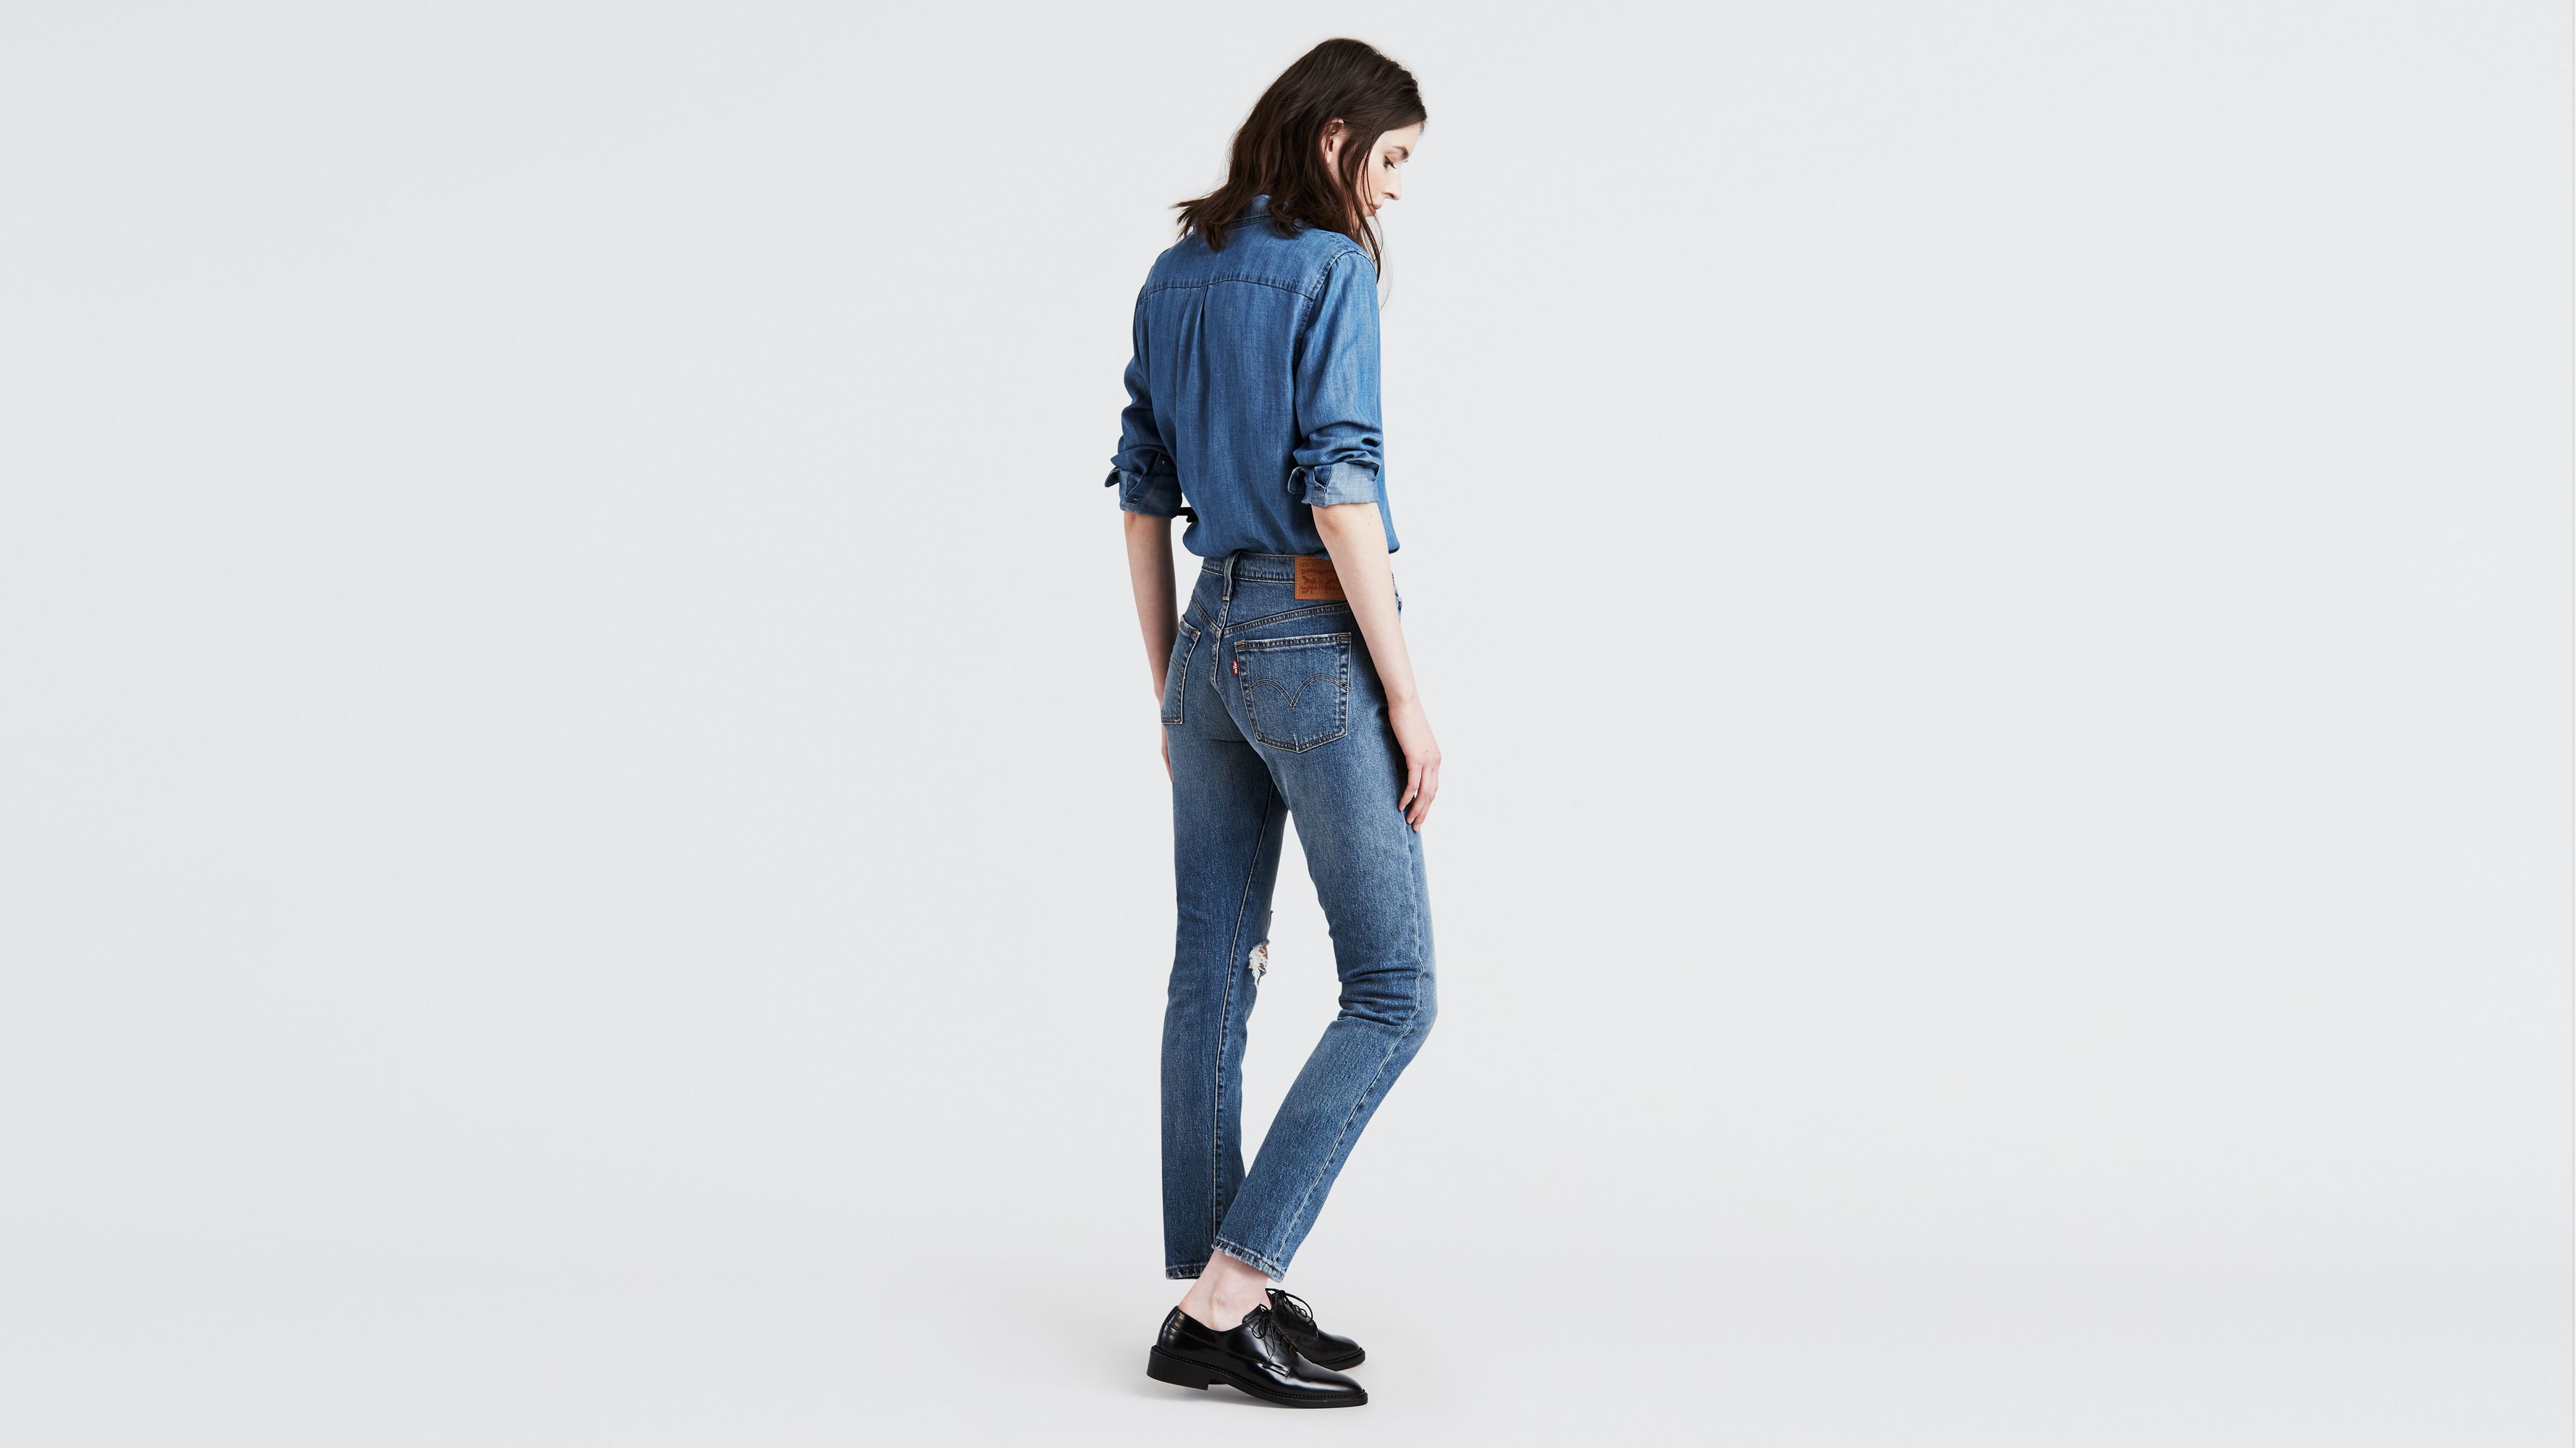 levis 501 button fly